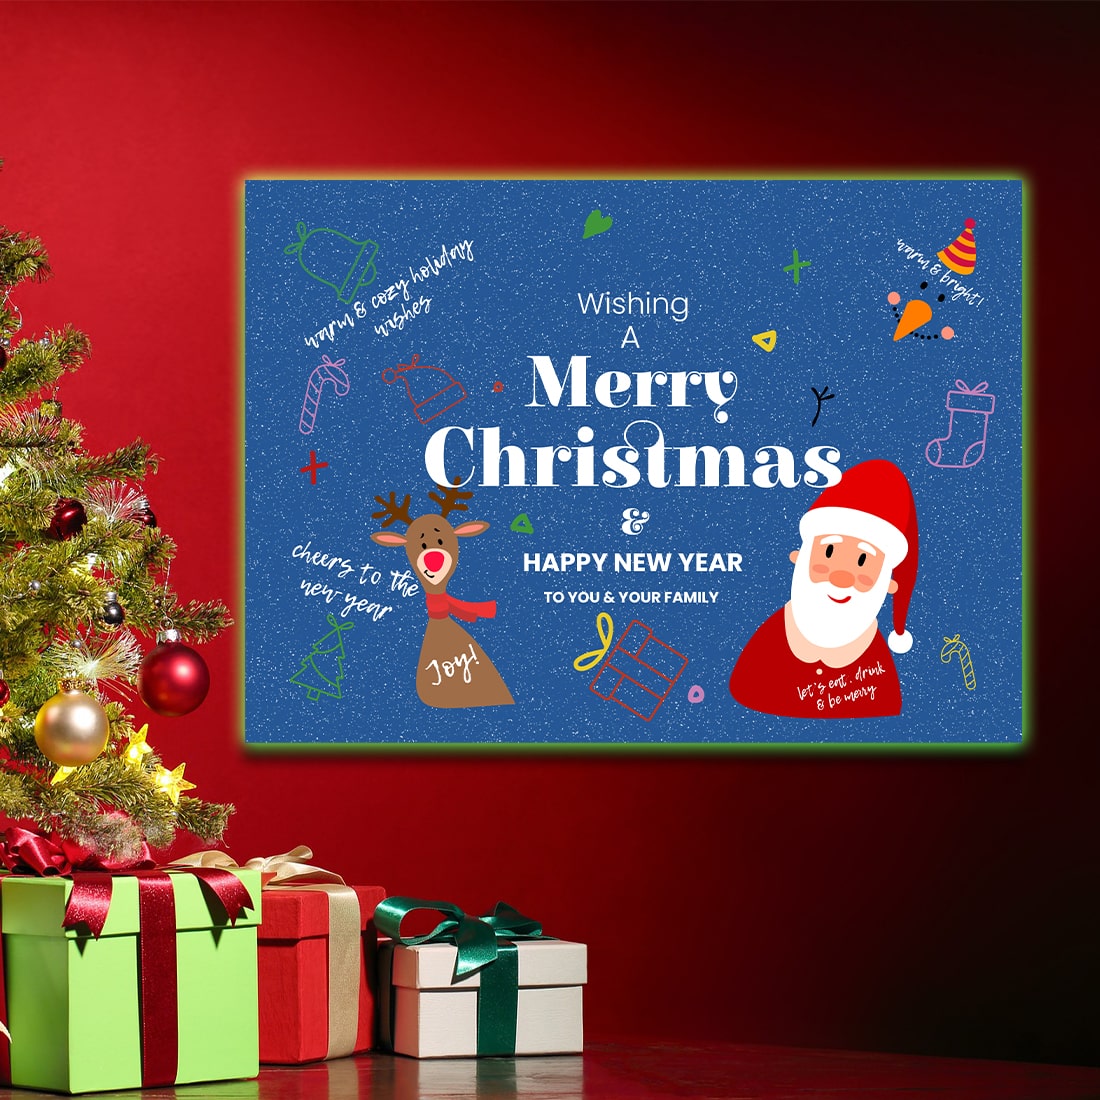 Christmas and New Year Printable Cards PSD cover image.